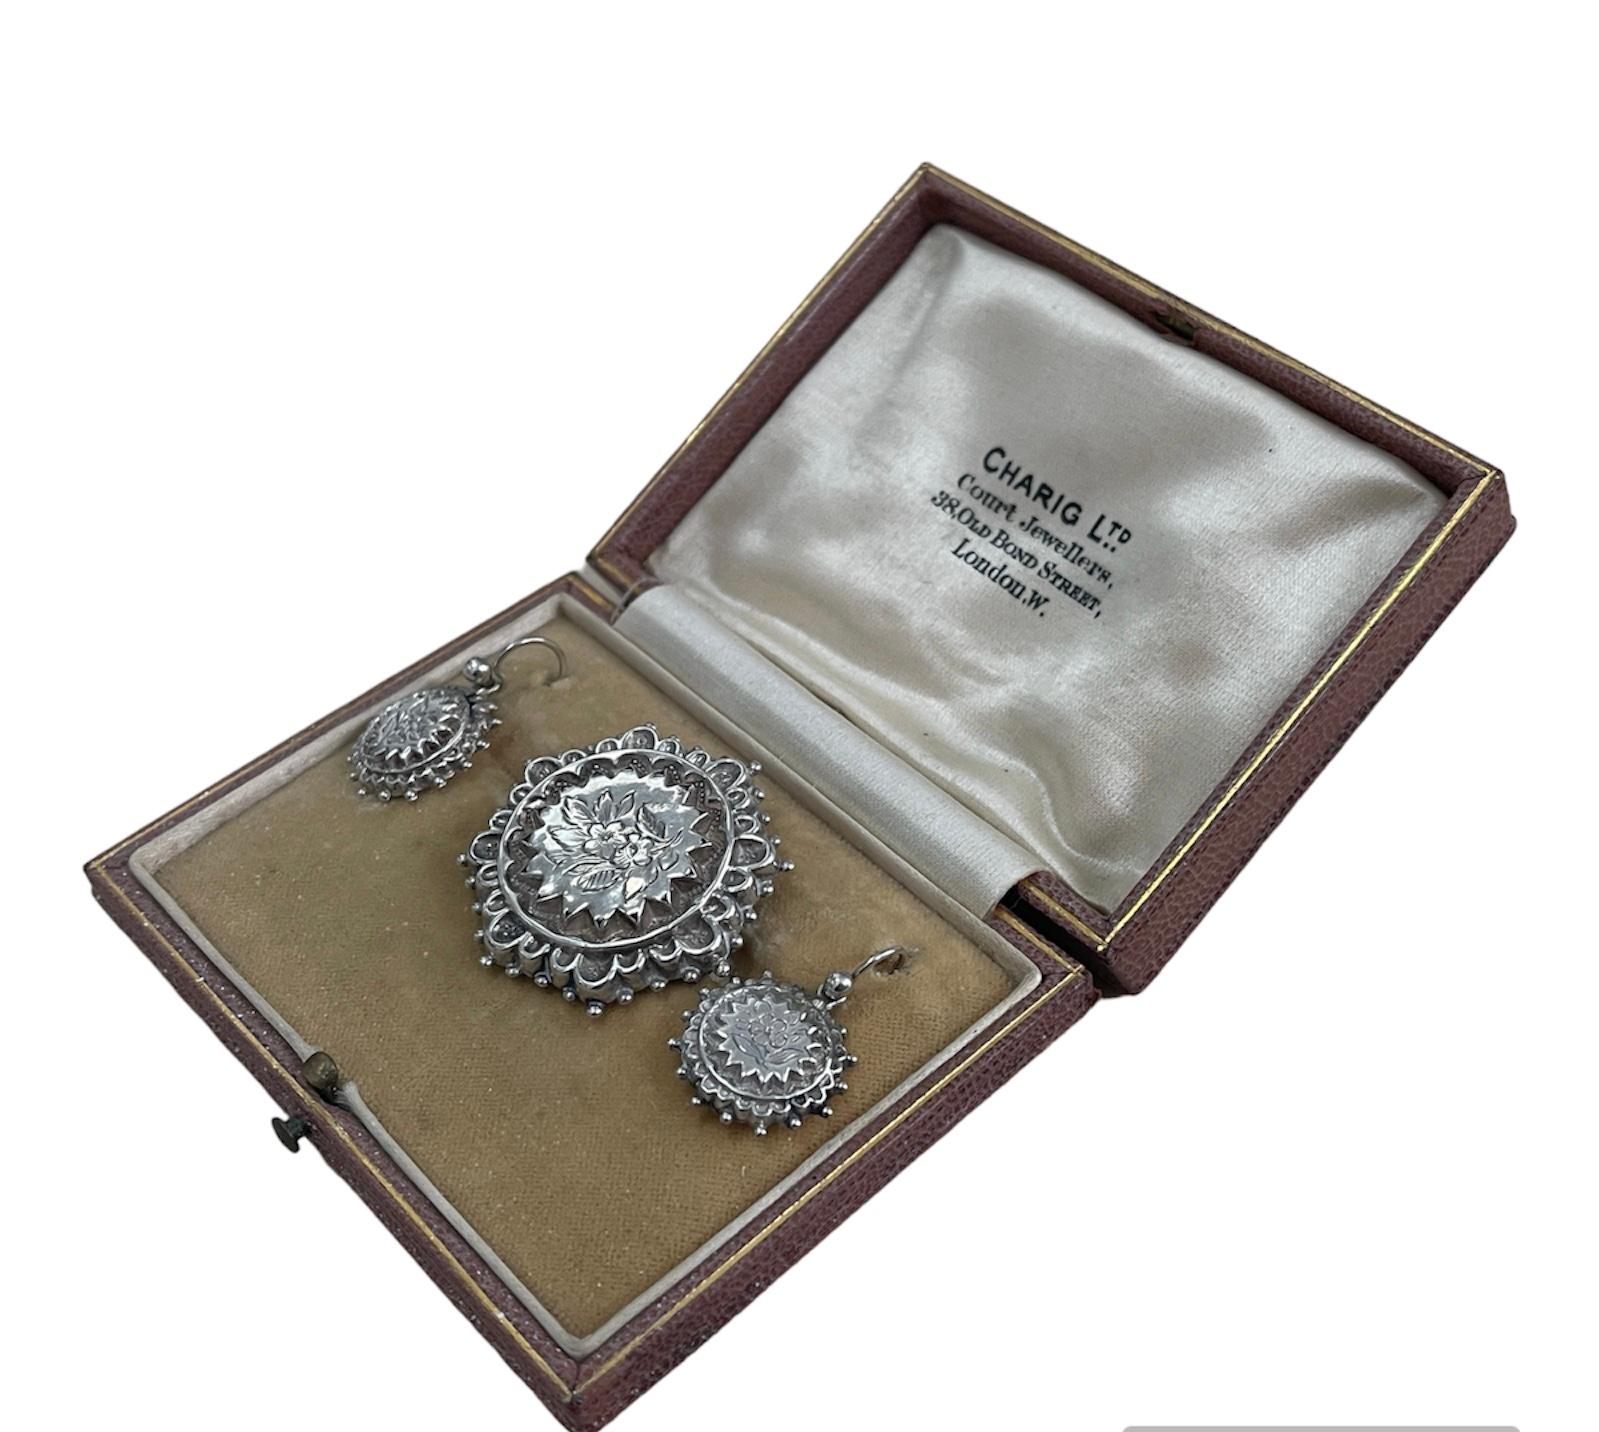 This lovely Victorian demi-parure features floral, hand etched decoration with a romantic edge.  The brooch hides a secret photo frame on the reverse which can hold your loved one close to your heart.
The matching earrings sit elegantly at the base